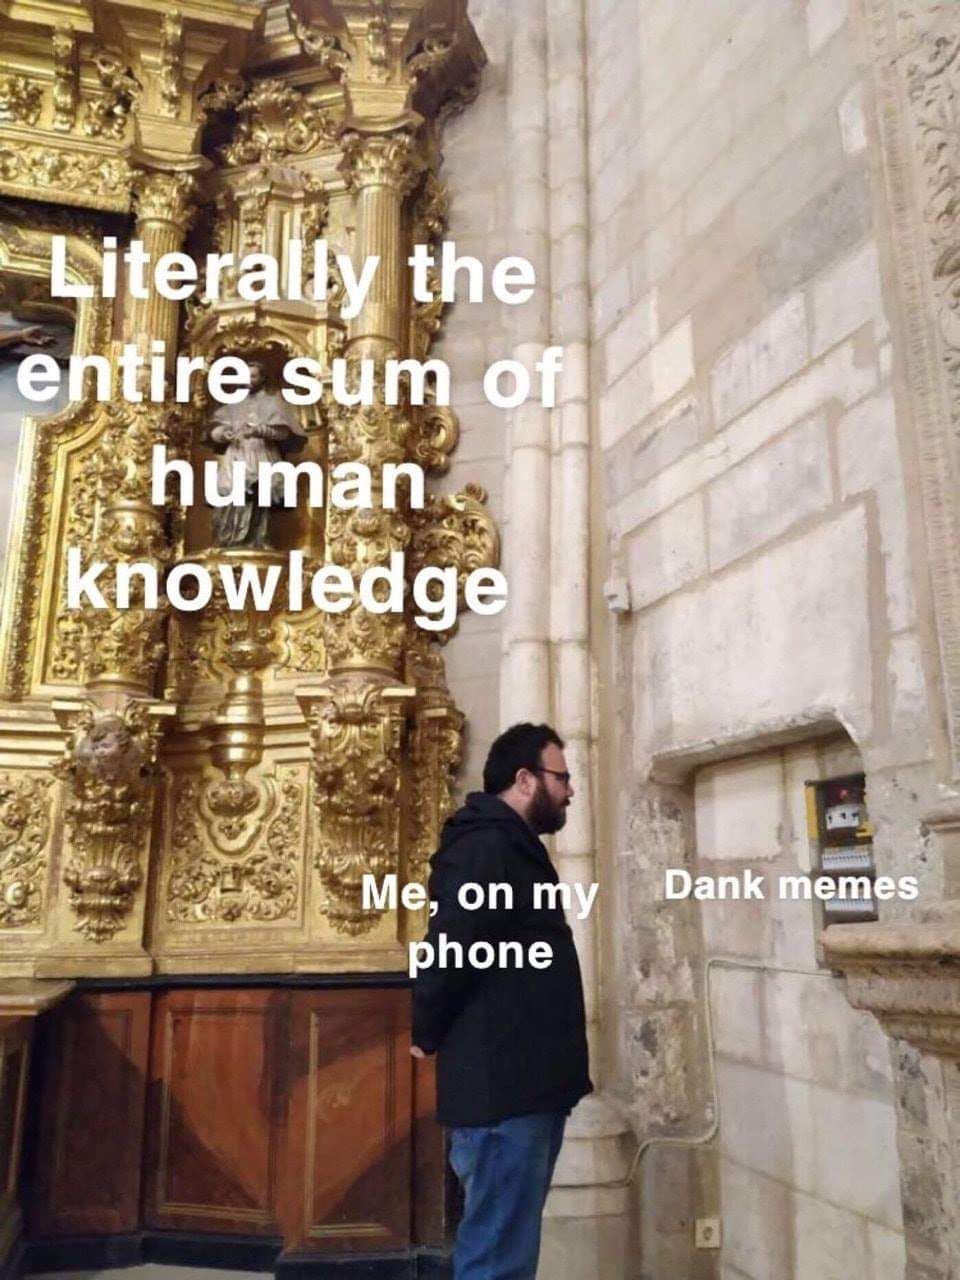 Literally the entire sum of human I knowledge Dank memes Me, on my phone